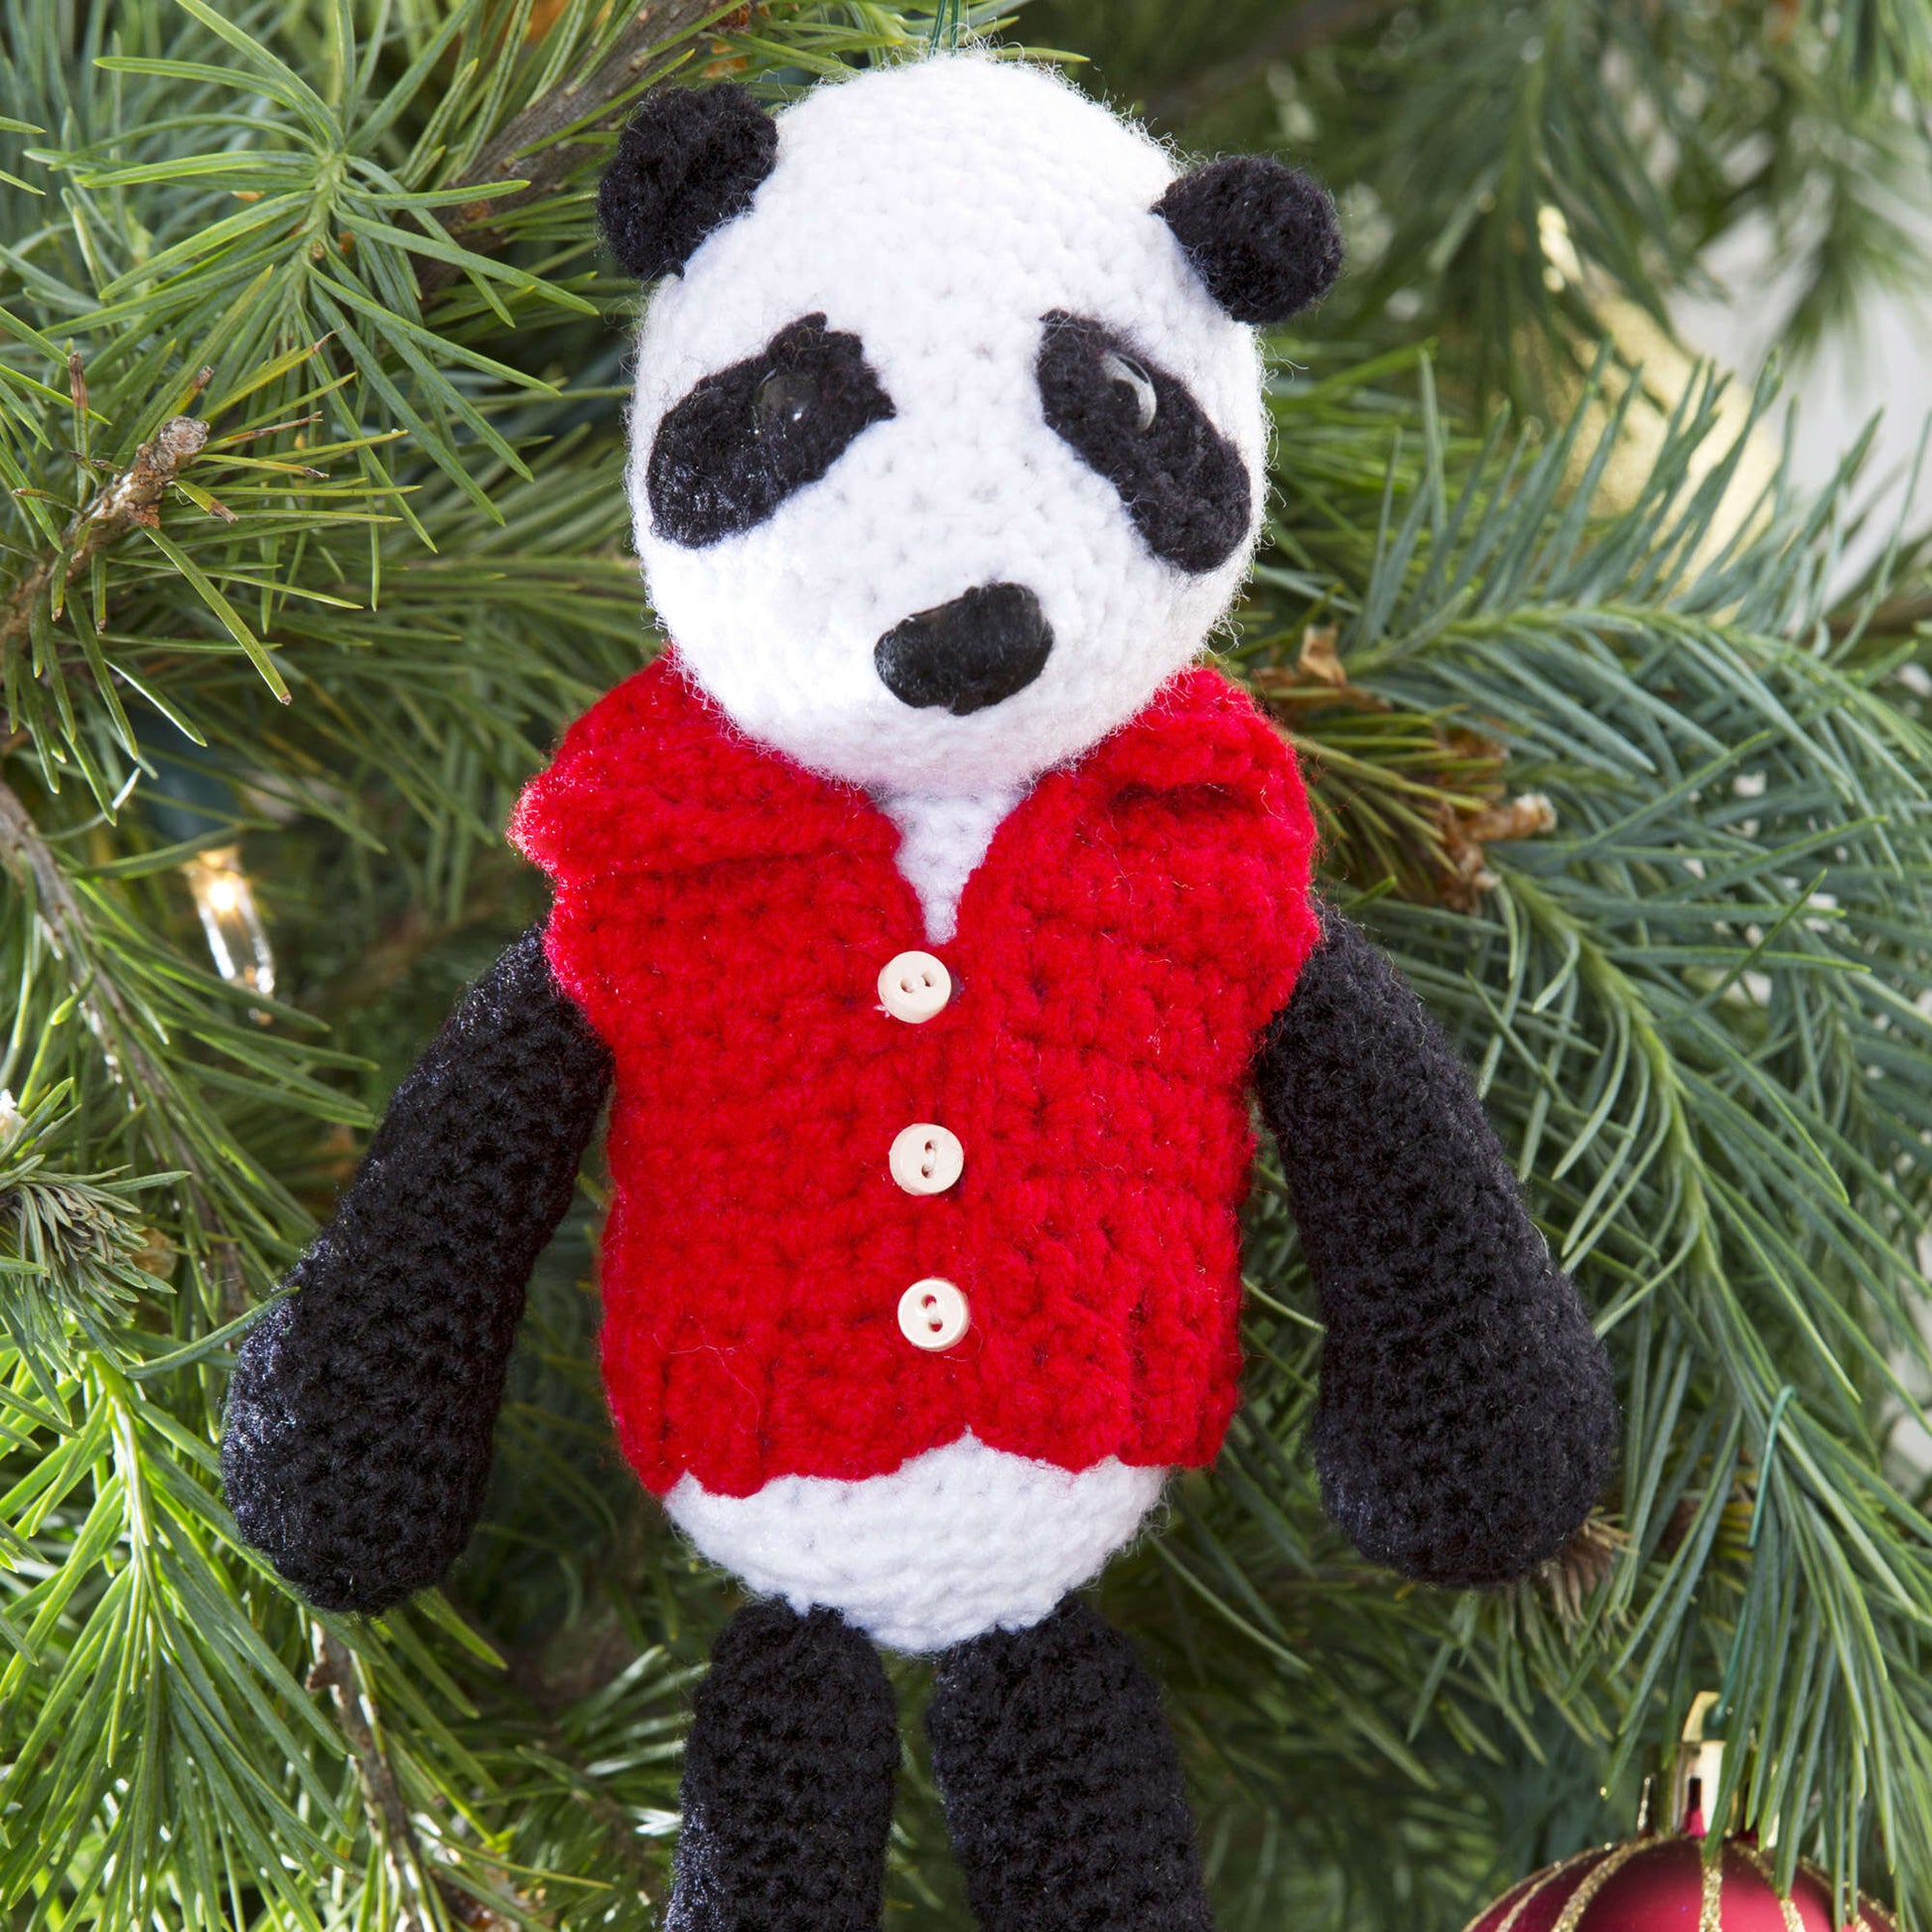 Free Red Heart Vested Panda Ornament Pattern